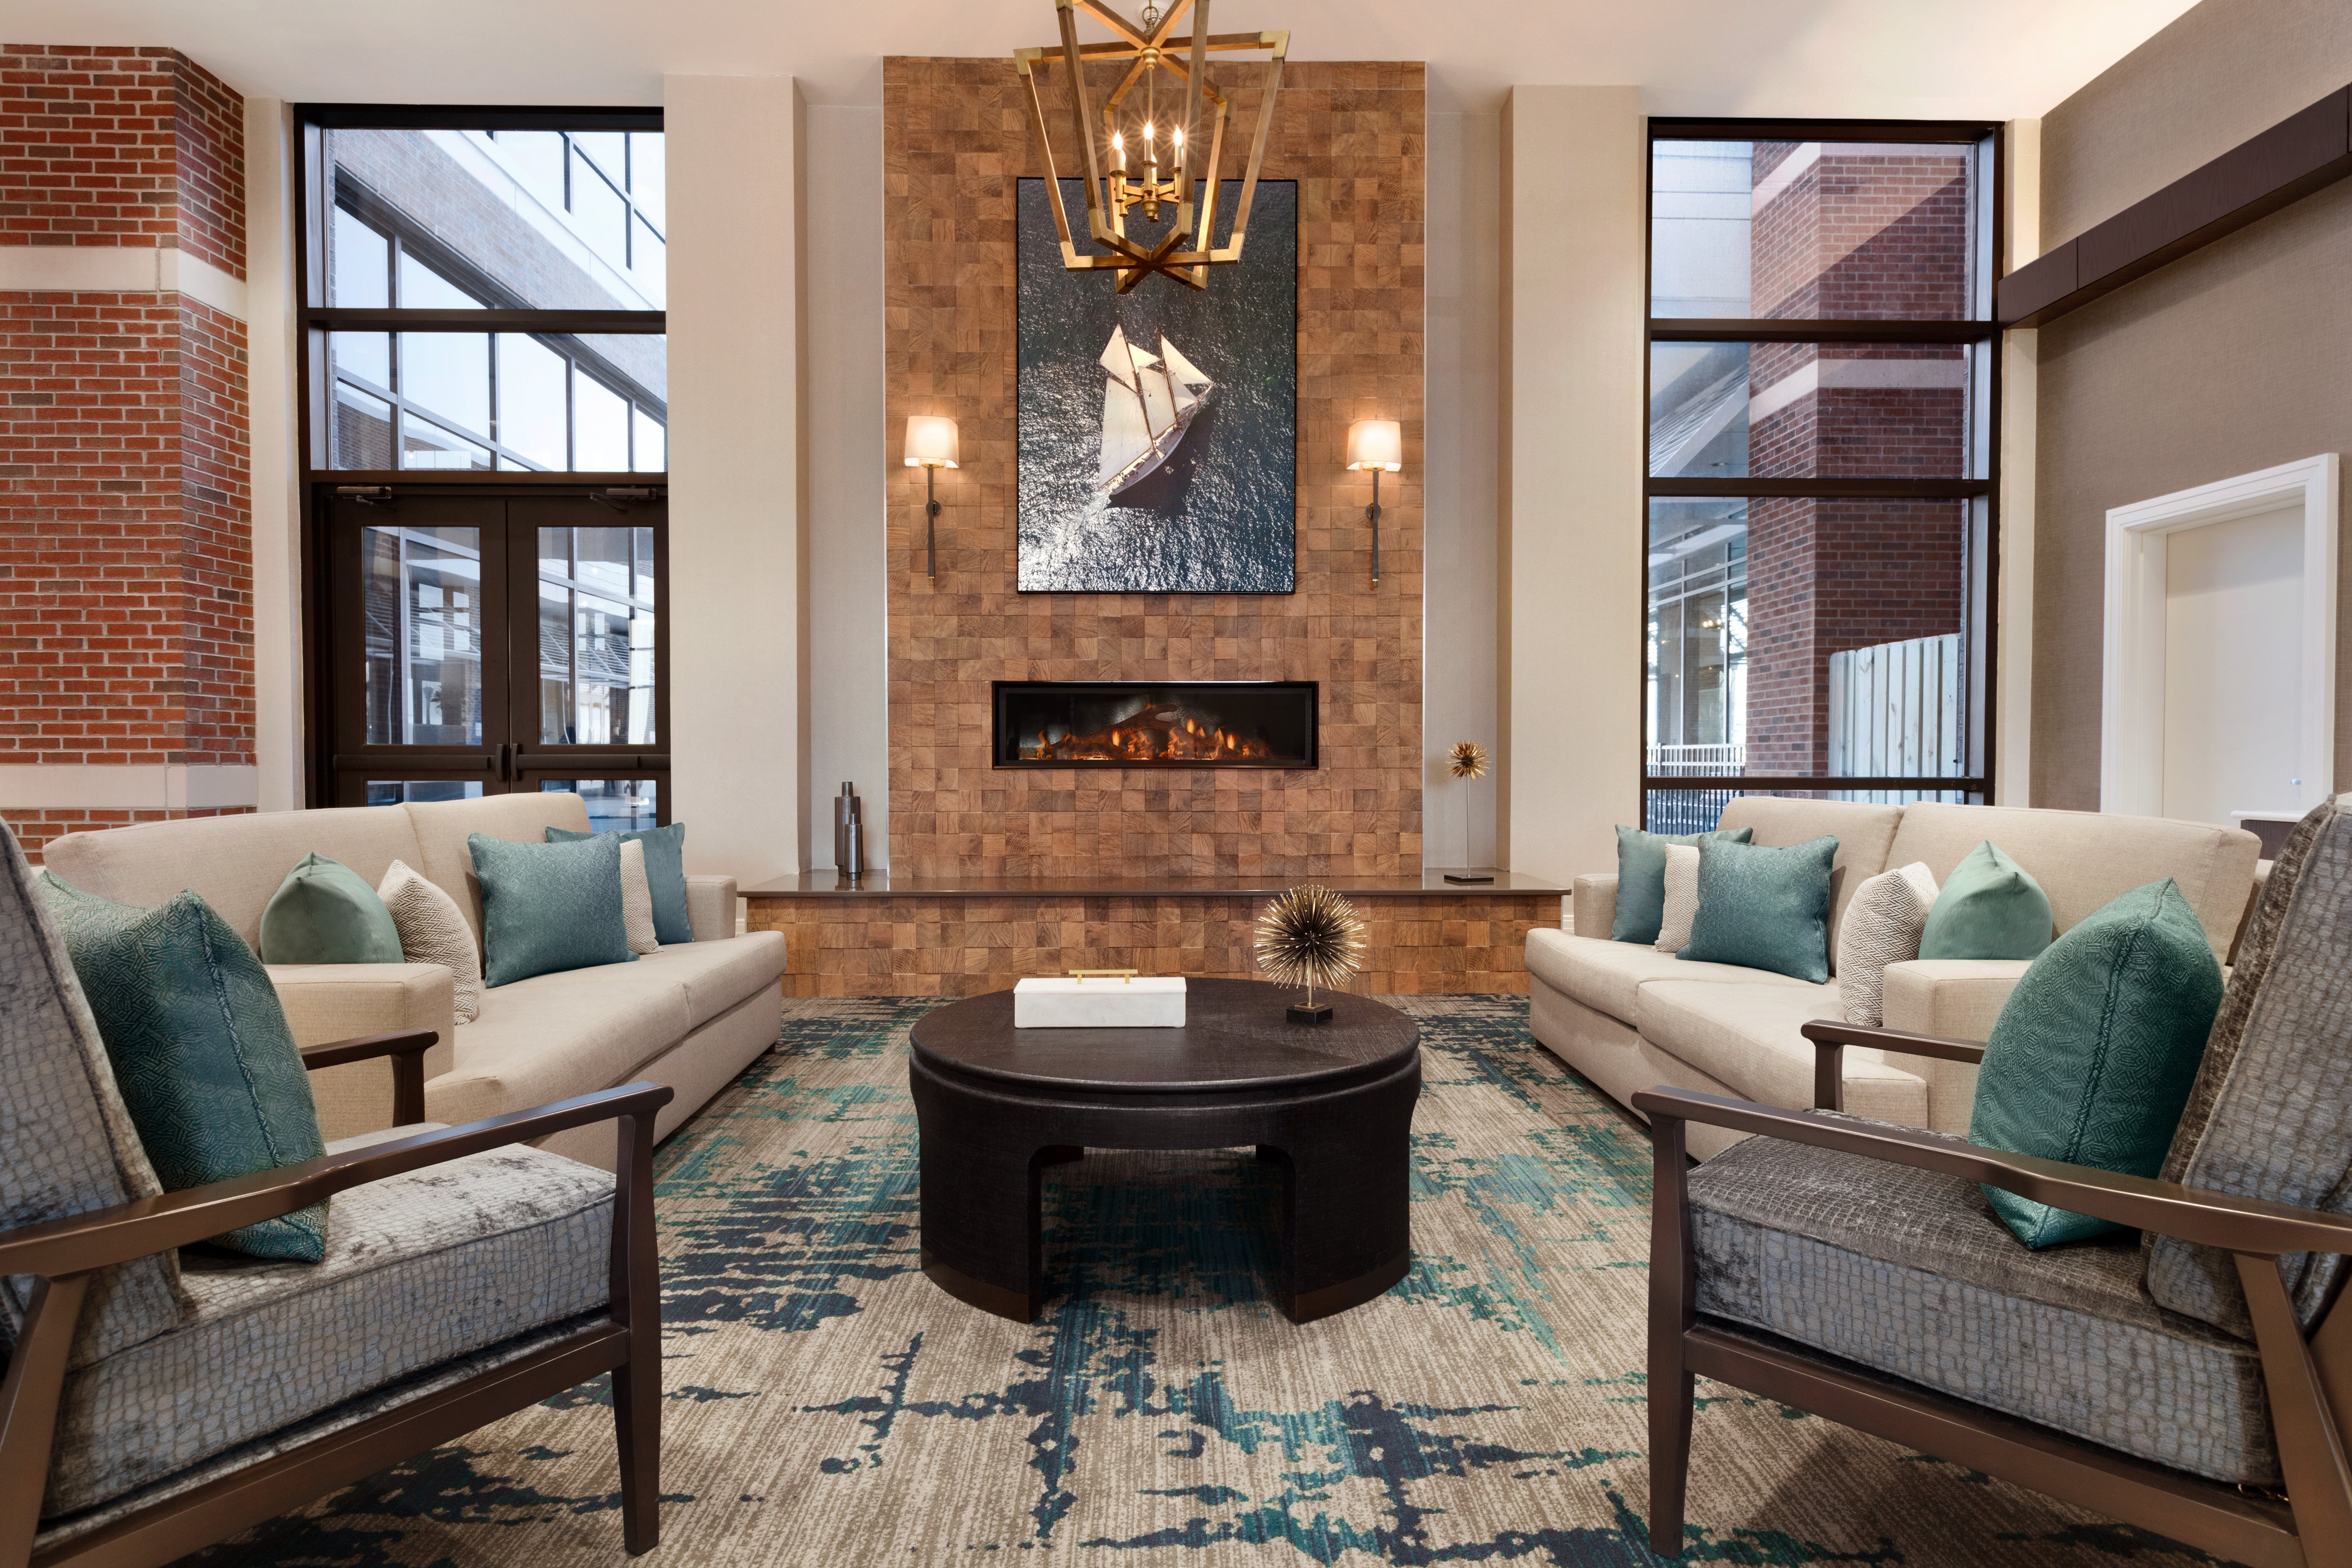 Lobby Atrium Seating Area with Sofas, Coffee Table, Armchairs and Fireplace